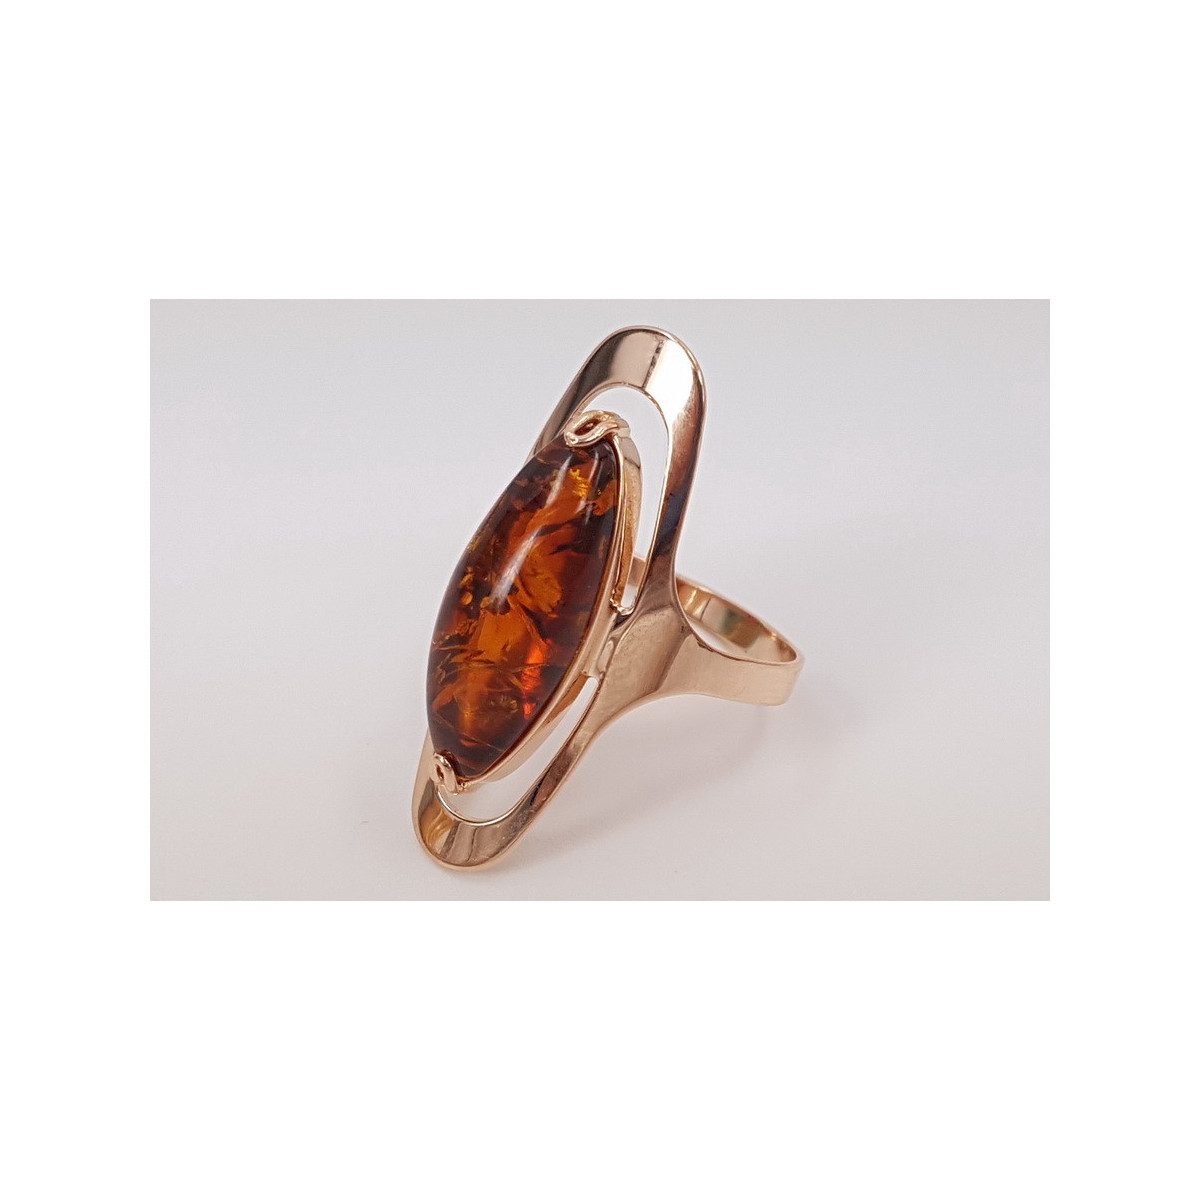 https://russiangold.com/50862-product_zoom/russisches-rosegold-bernstein-ring-vrab016.jpg